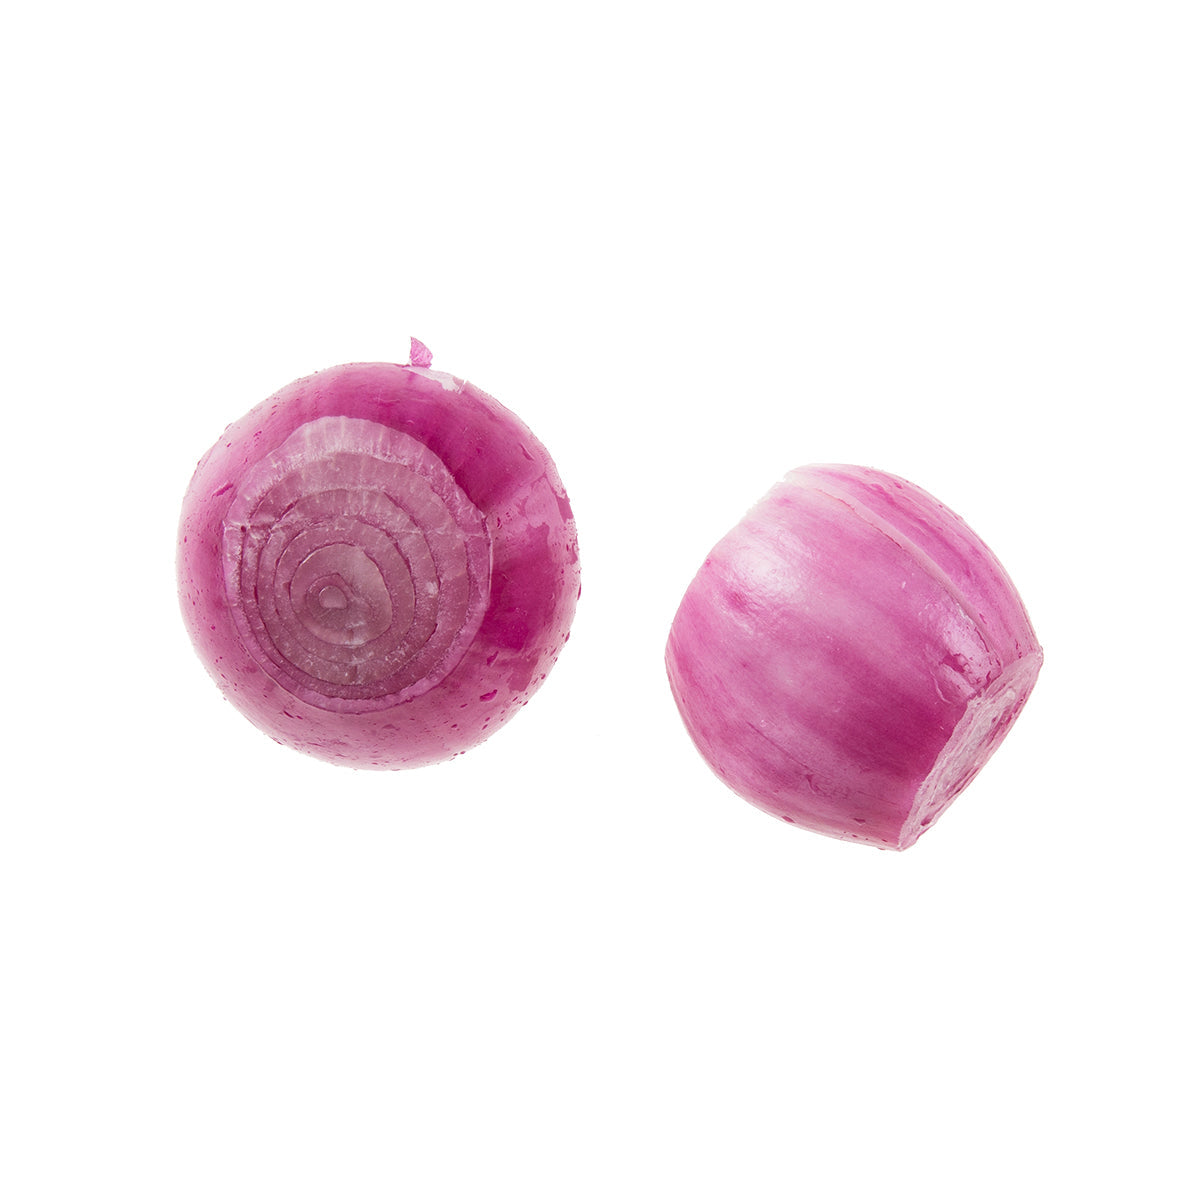 BoxNCase Peeled Red Onions 5 LB